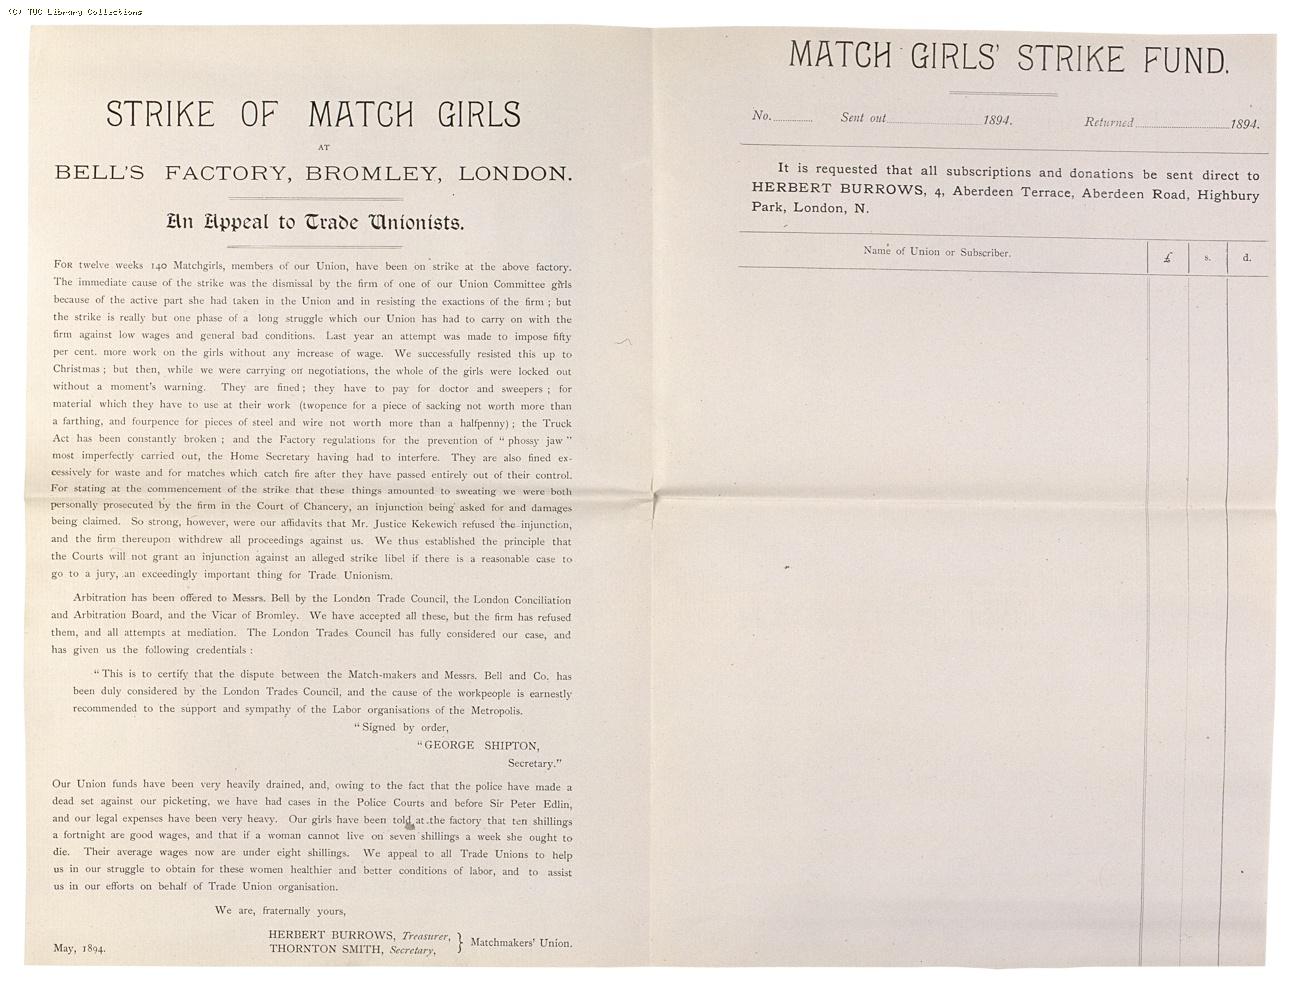 Matchmakers' Union strike fund appeal for Bell's factory, Bromley by Bow, 1894